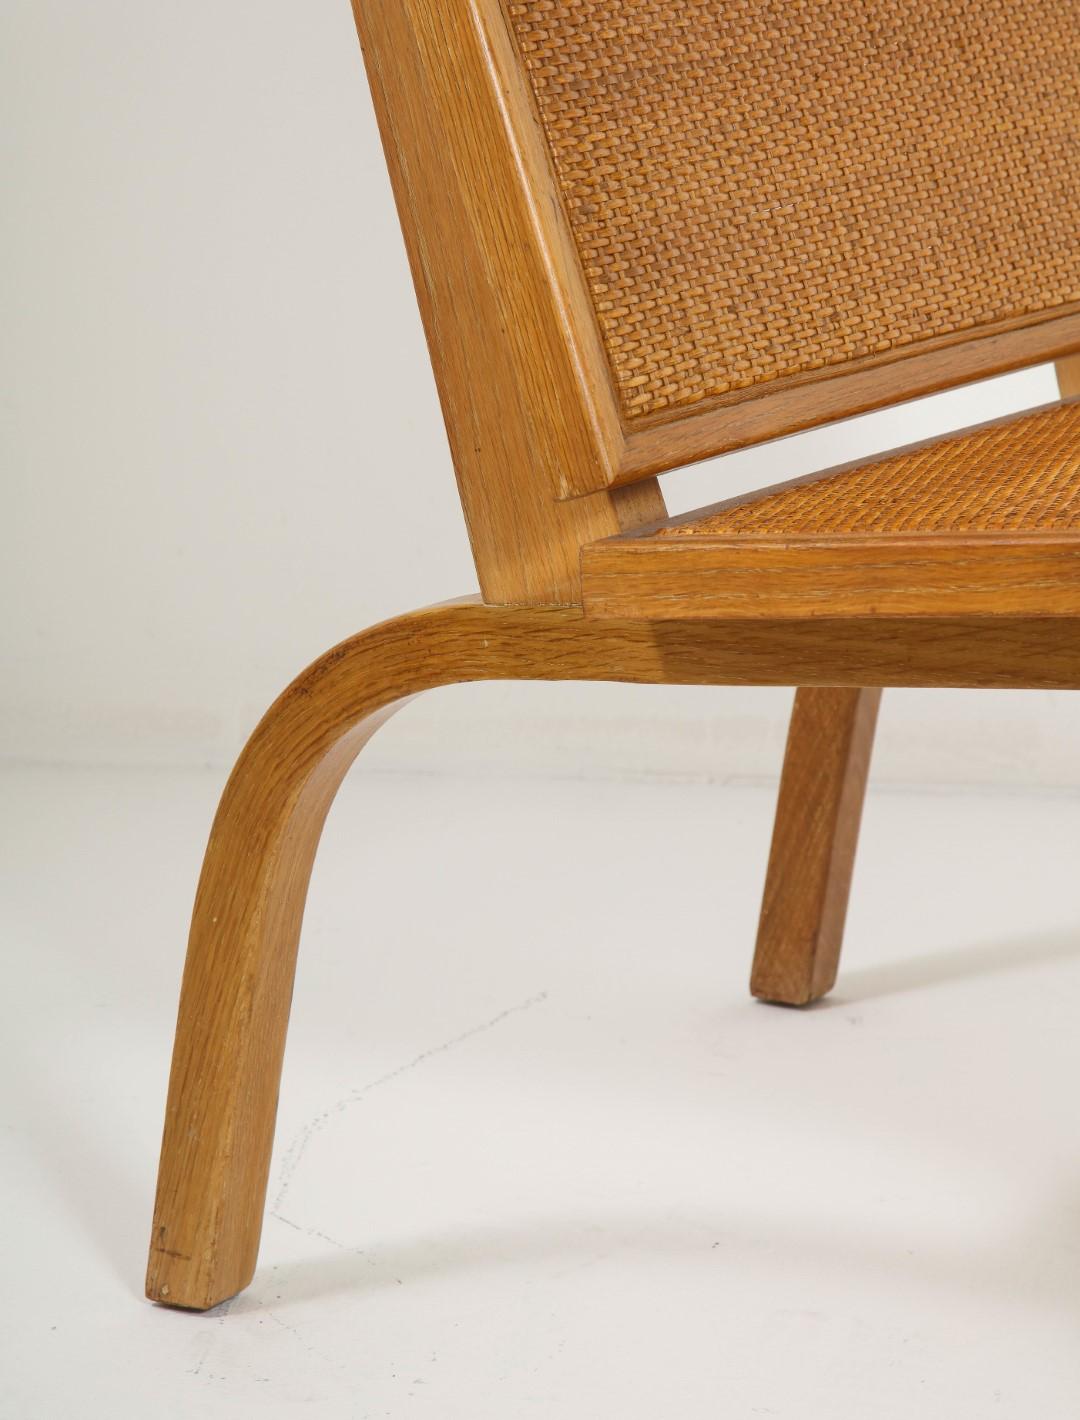 Midcentury Woven Oak Lounge Chair by Edward Durell Stone 1